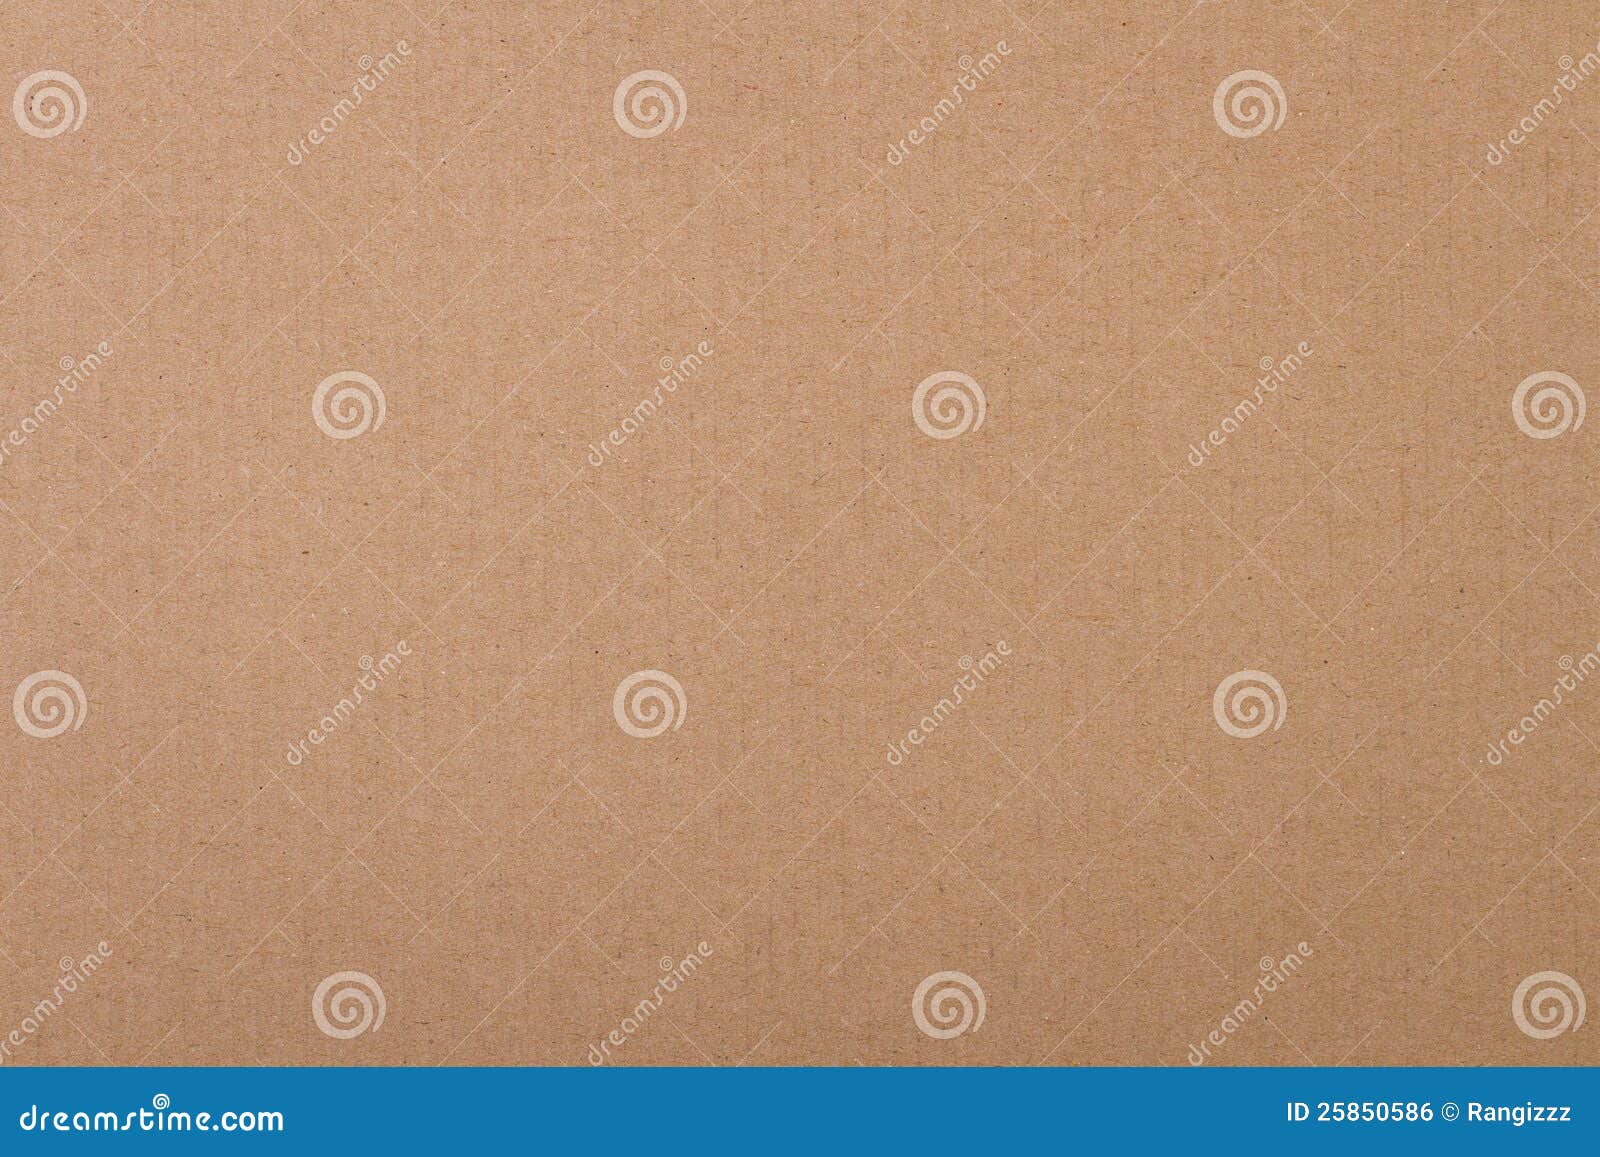 cardboard texture with copy space